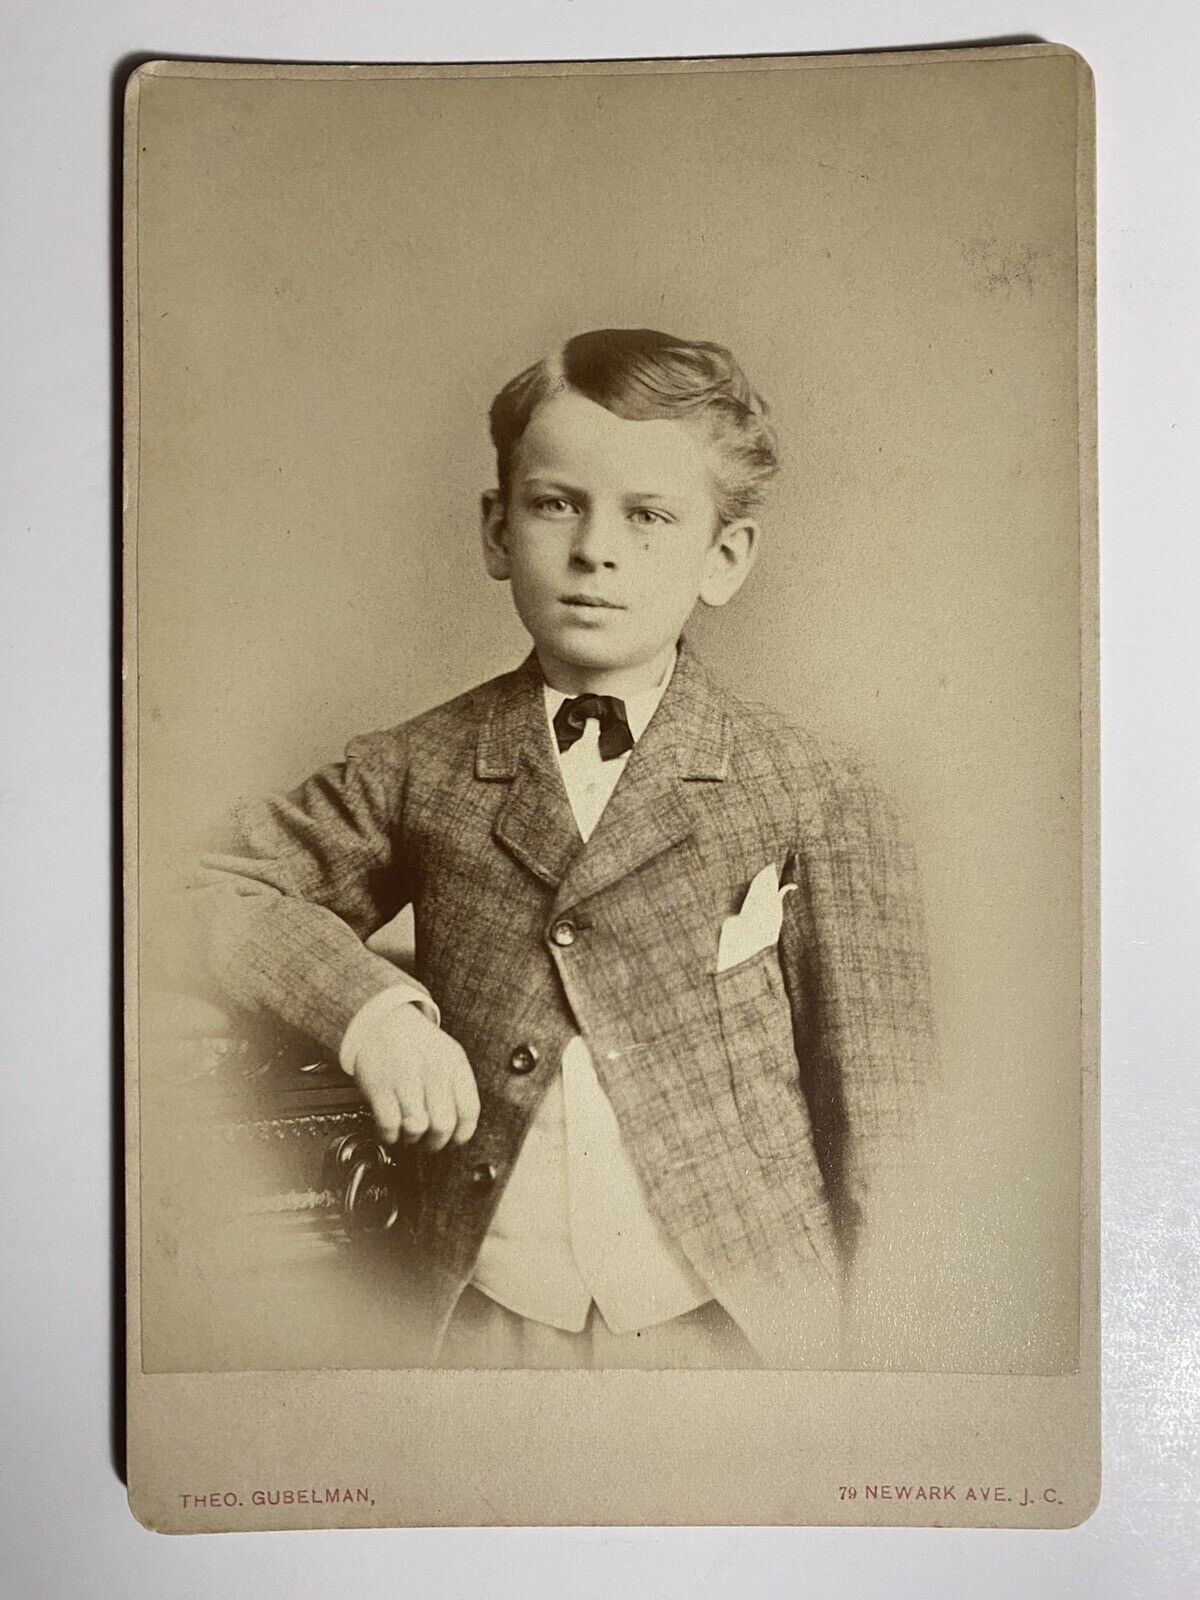 Vintage 1890 Cabinet Card Young Boy Bow tie Suit 